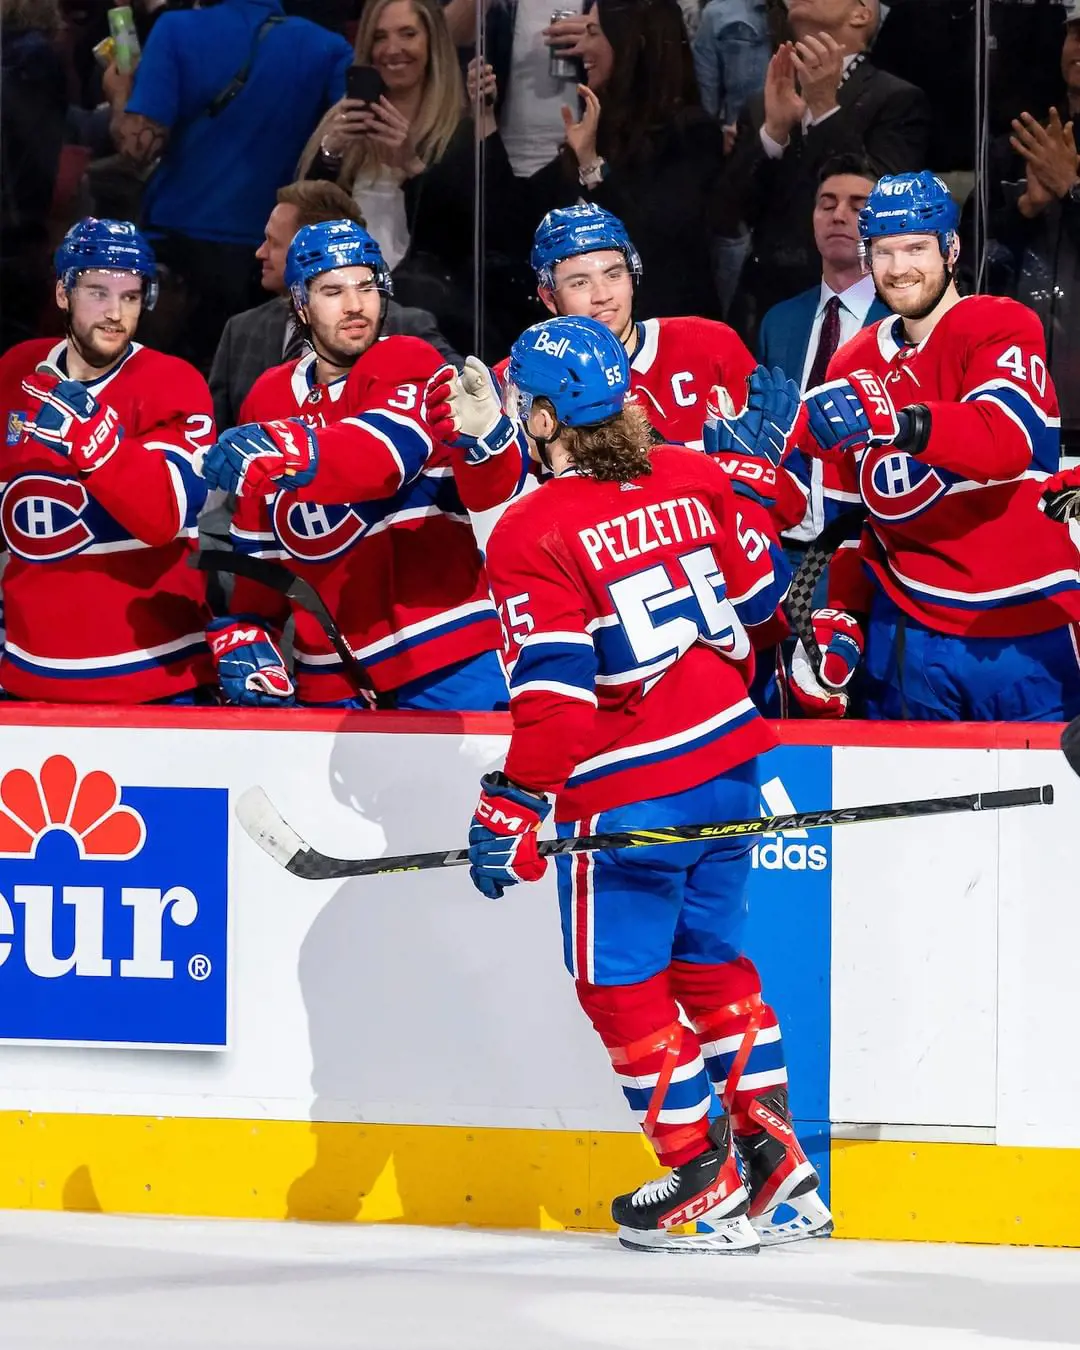 The Montreal players celebrating their first goal in the NHL first shift